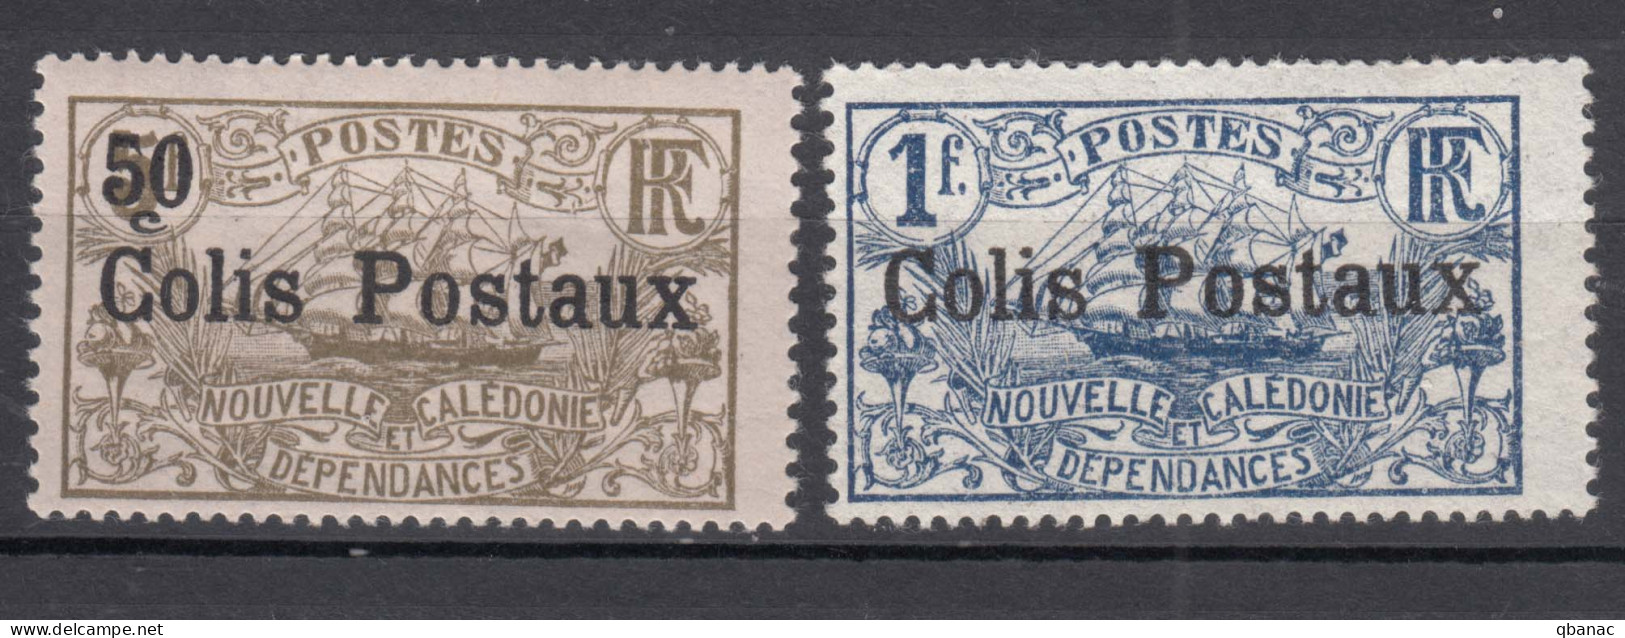 New Caledonia Nouvelle Caledonie 1926 Colis Postaux Yvert#1,2 Mint Hinged - Unused Stamps